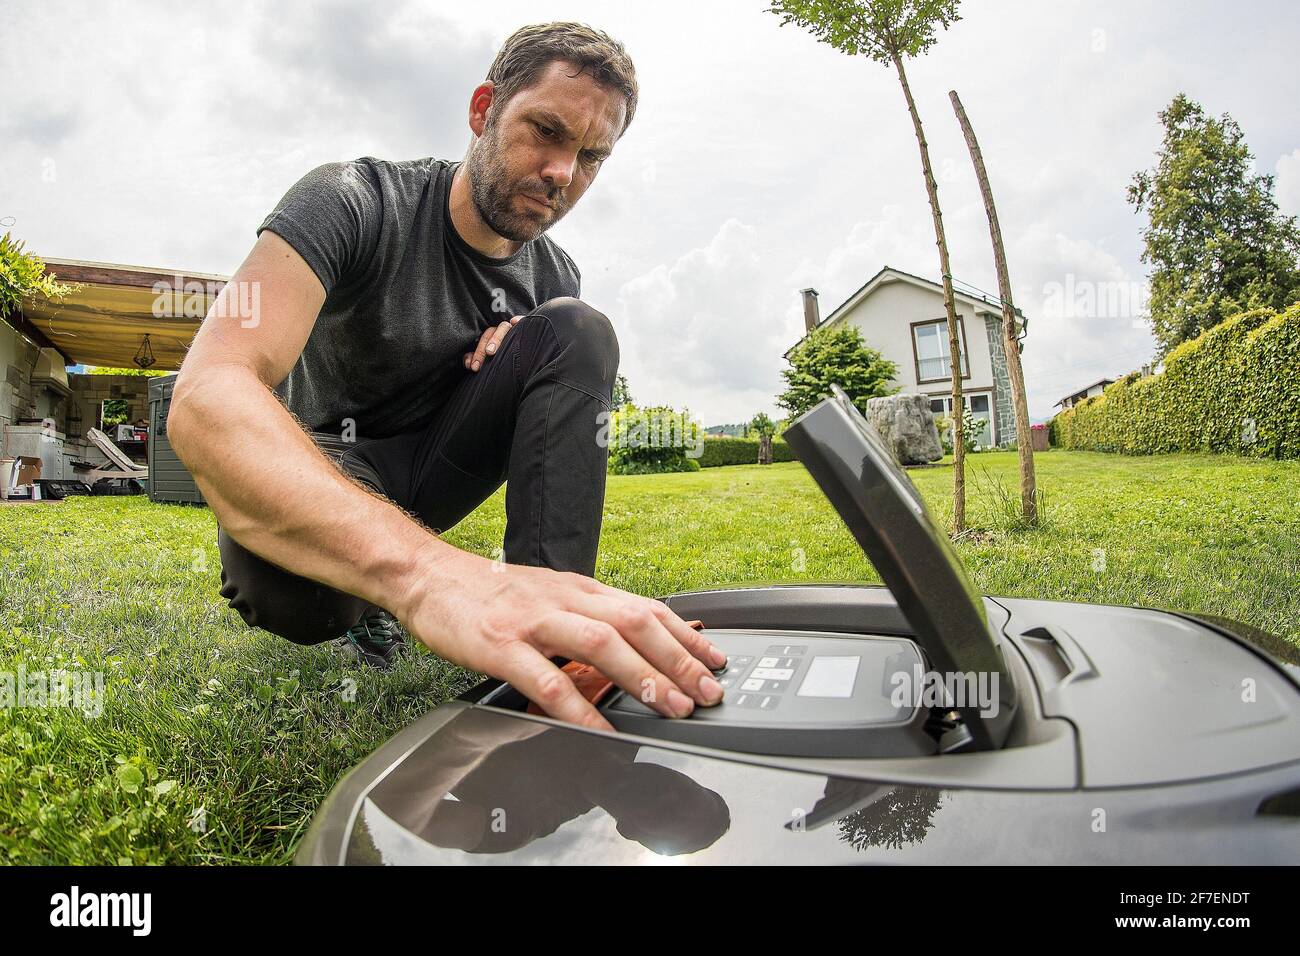 Young caucasian male is setting a robotic mower while kneeling in a nice green garden with blue skies. Stock Photo